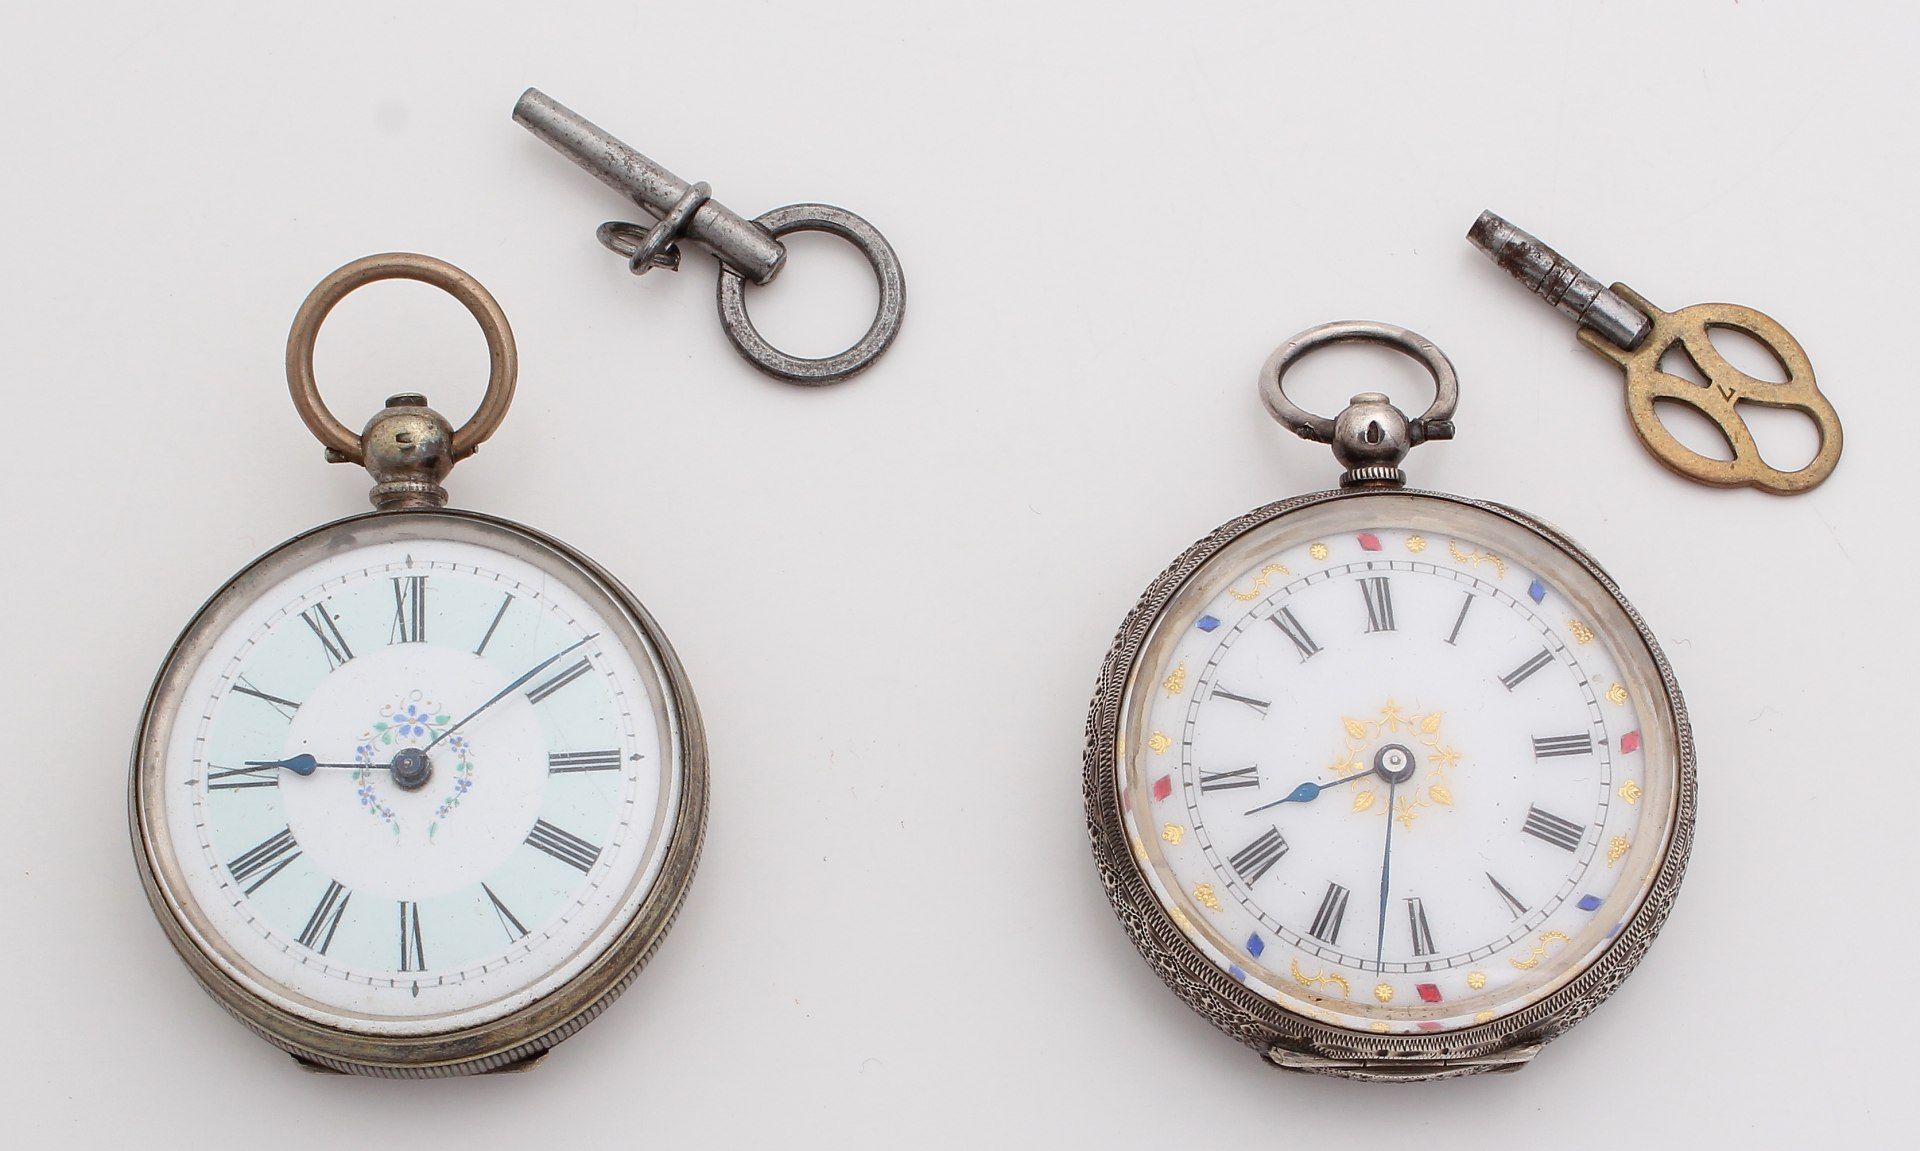 Lot with two silver pocket watches, 800/000 and 935/000. A pocket watch with a dial decorated with